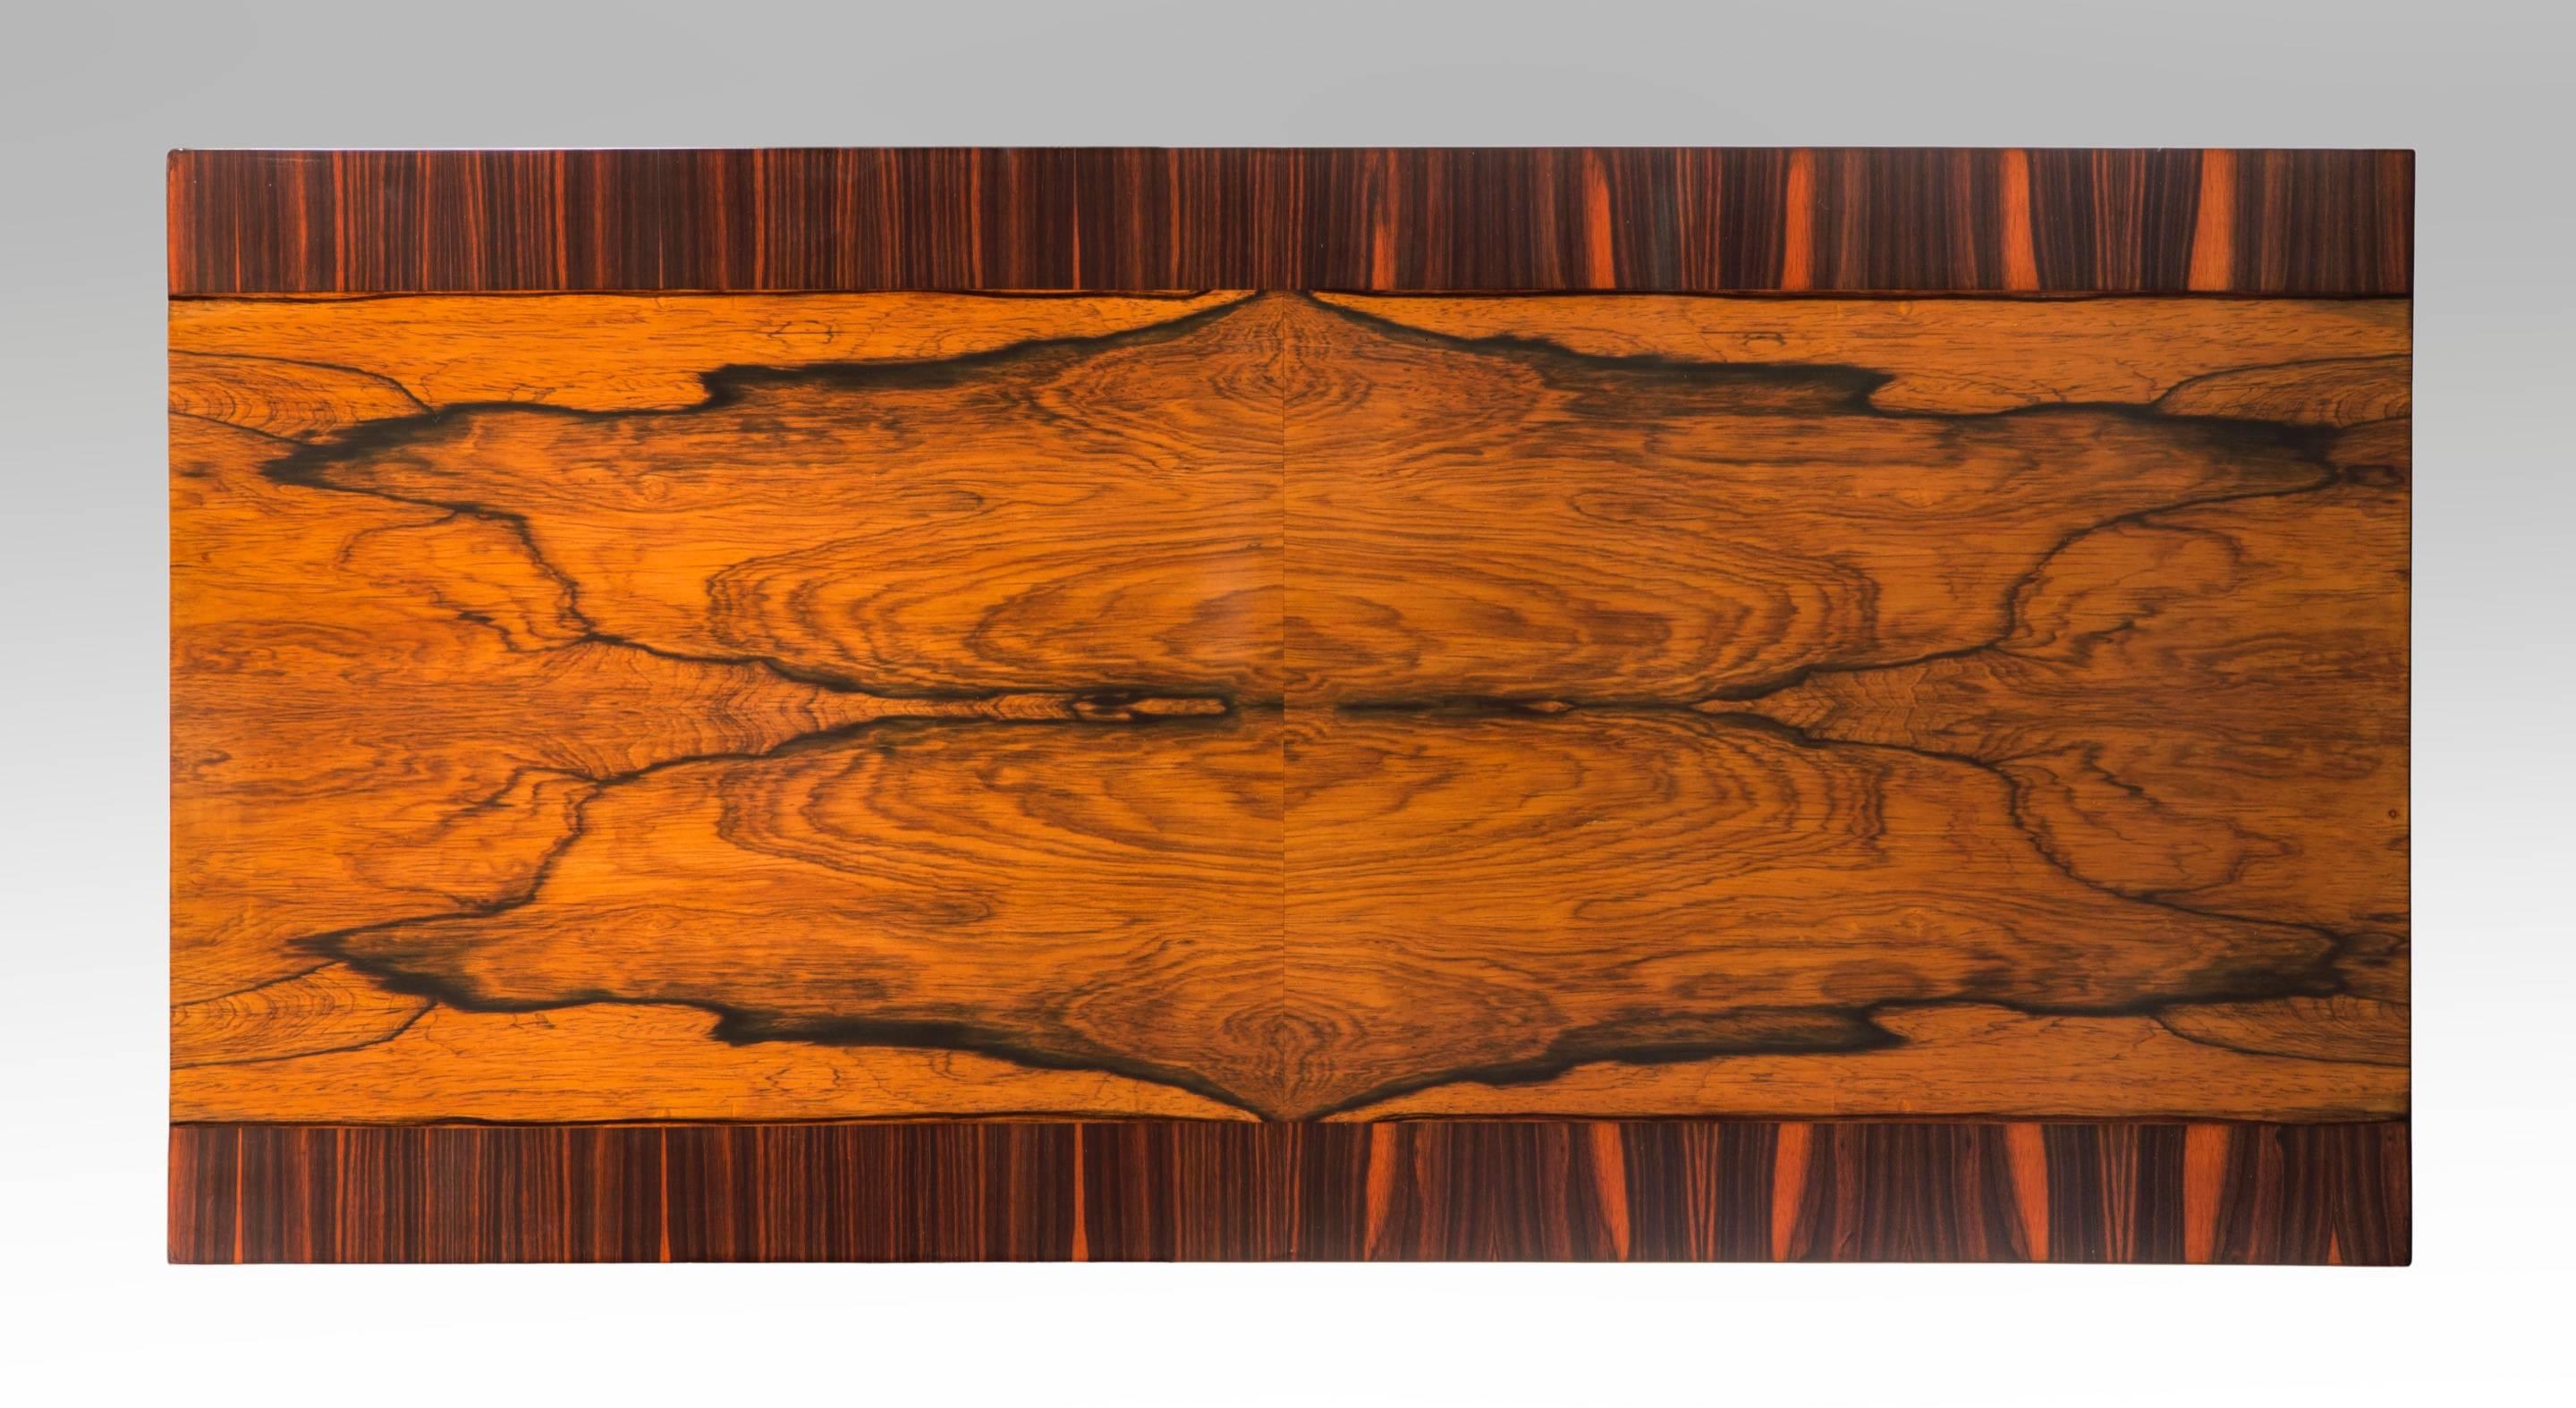 Wonderful robustly contrasting veneers enliven this table. The rectangular bookmatched palisander top crossbanded with macassar ebony, raised on ebonized fluted columnar legs headed by foliate capitals. Stamped: R within a triangle (for Reiners